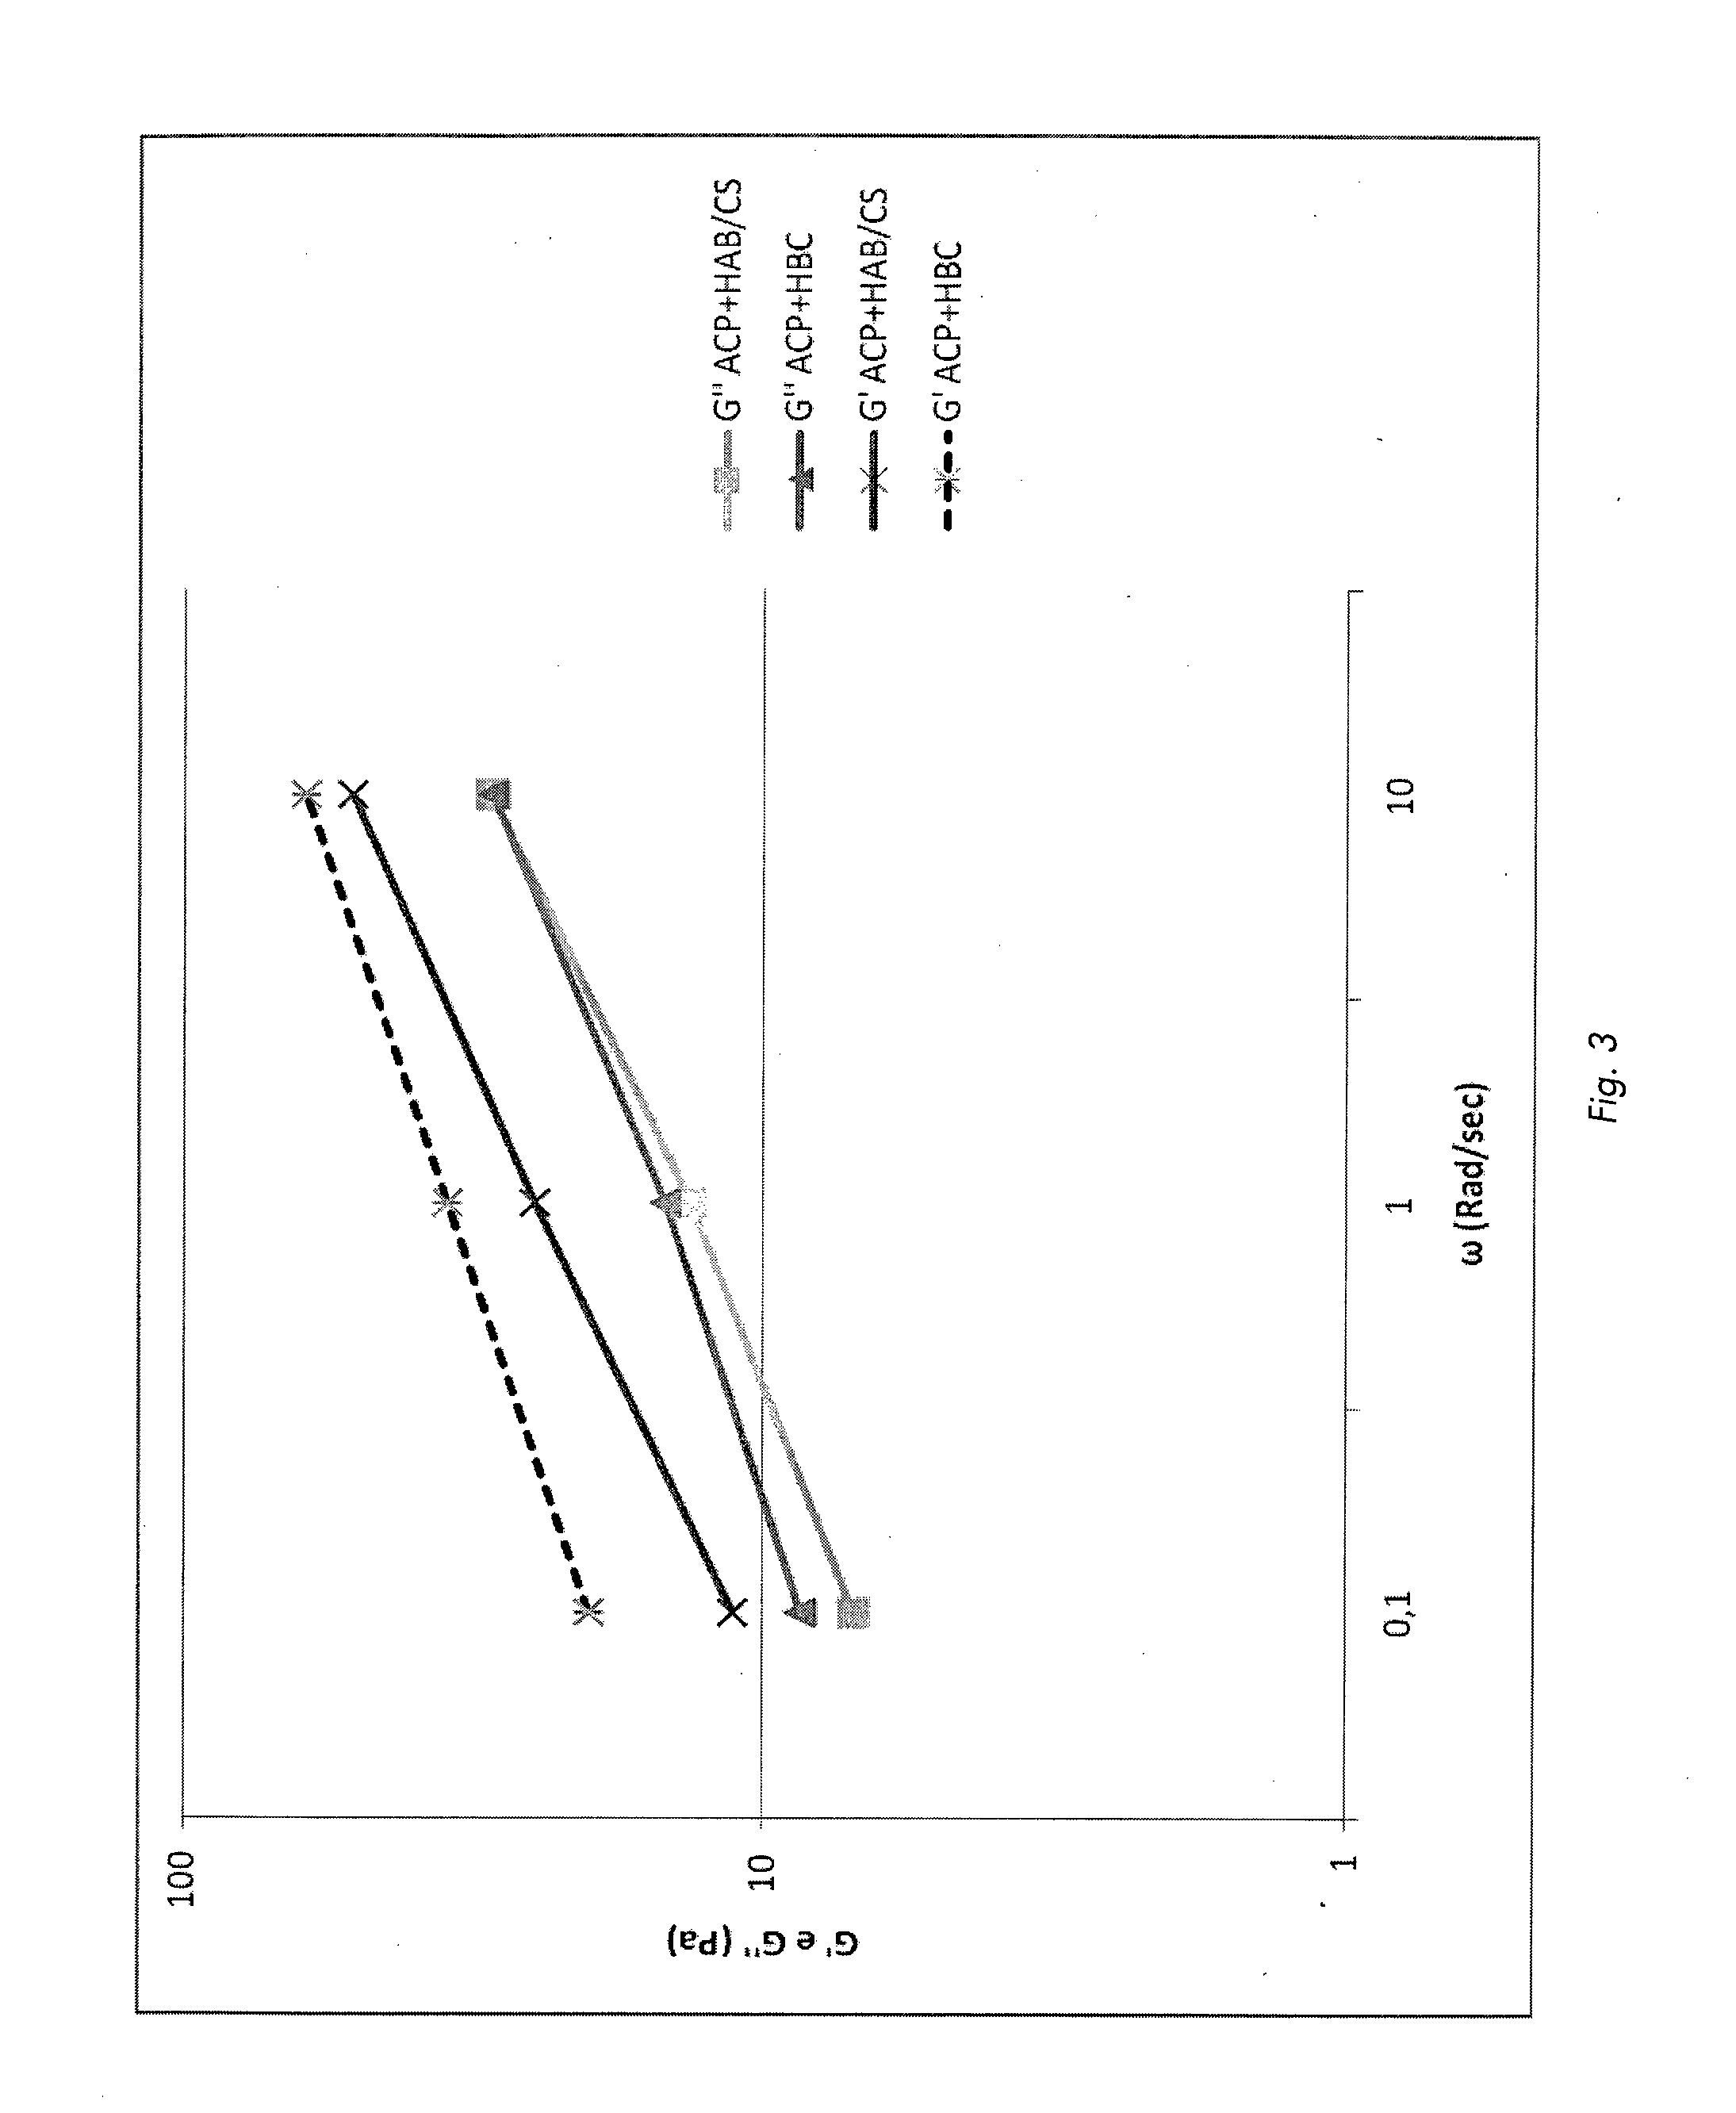 Pharmaceutical formulations comprising chondroitin sulfate and hyaluronic acid derivatives